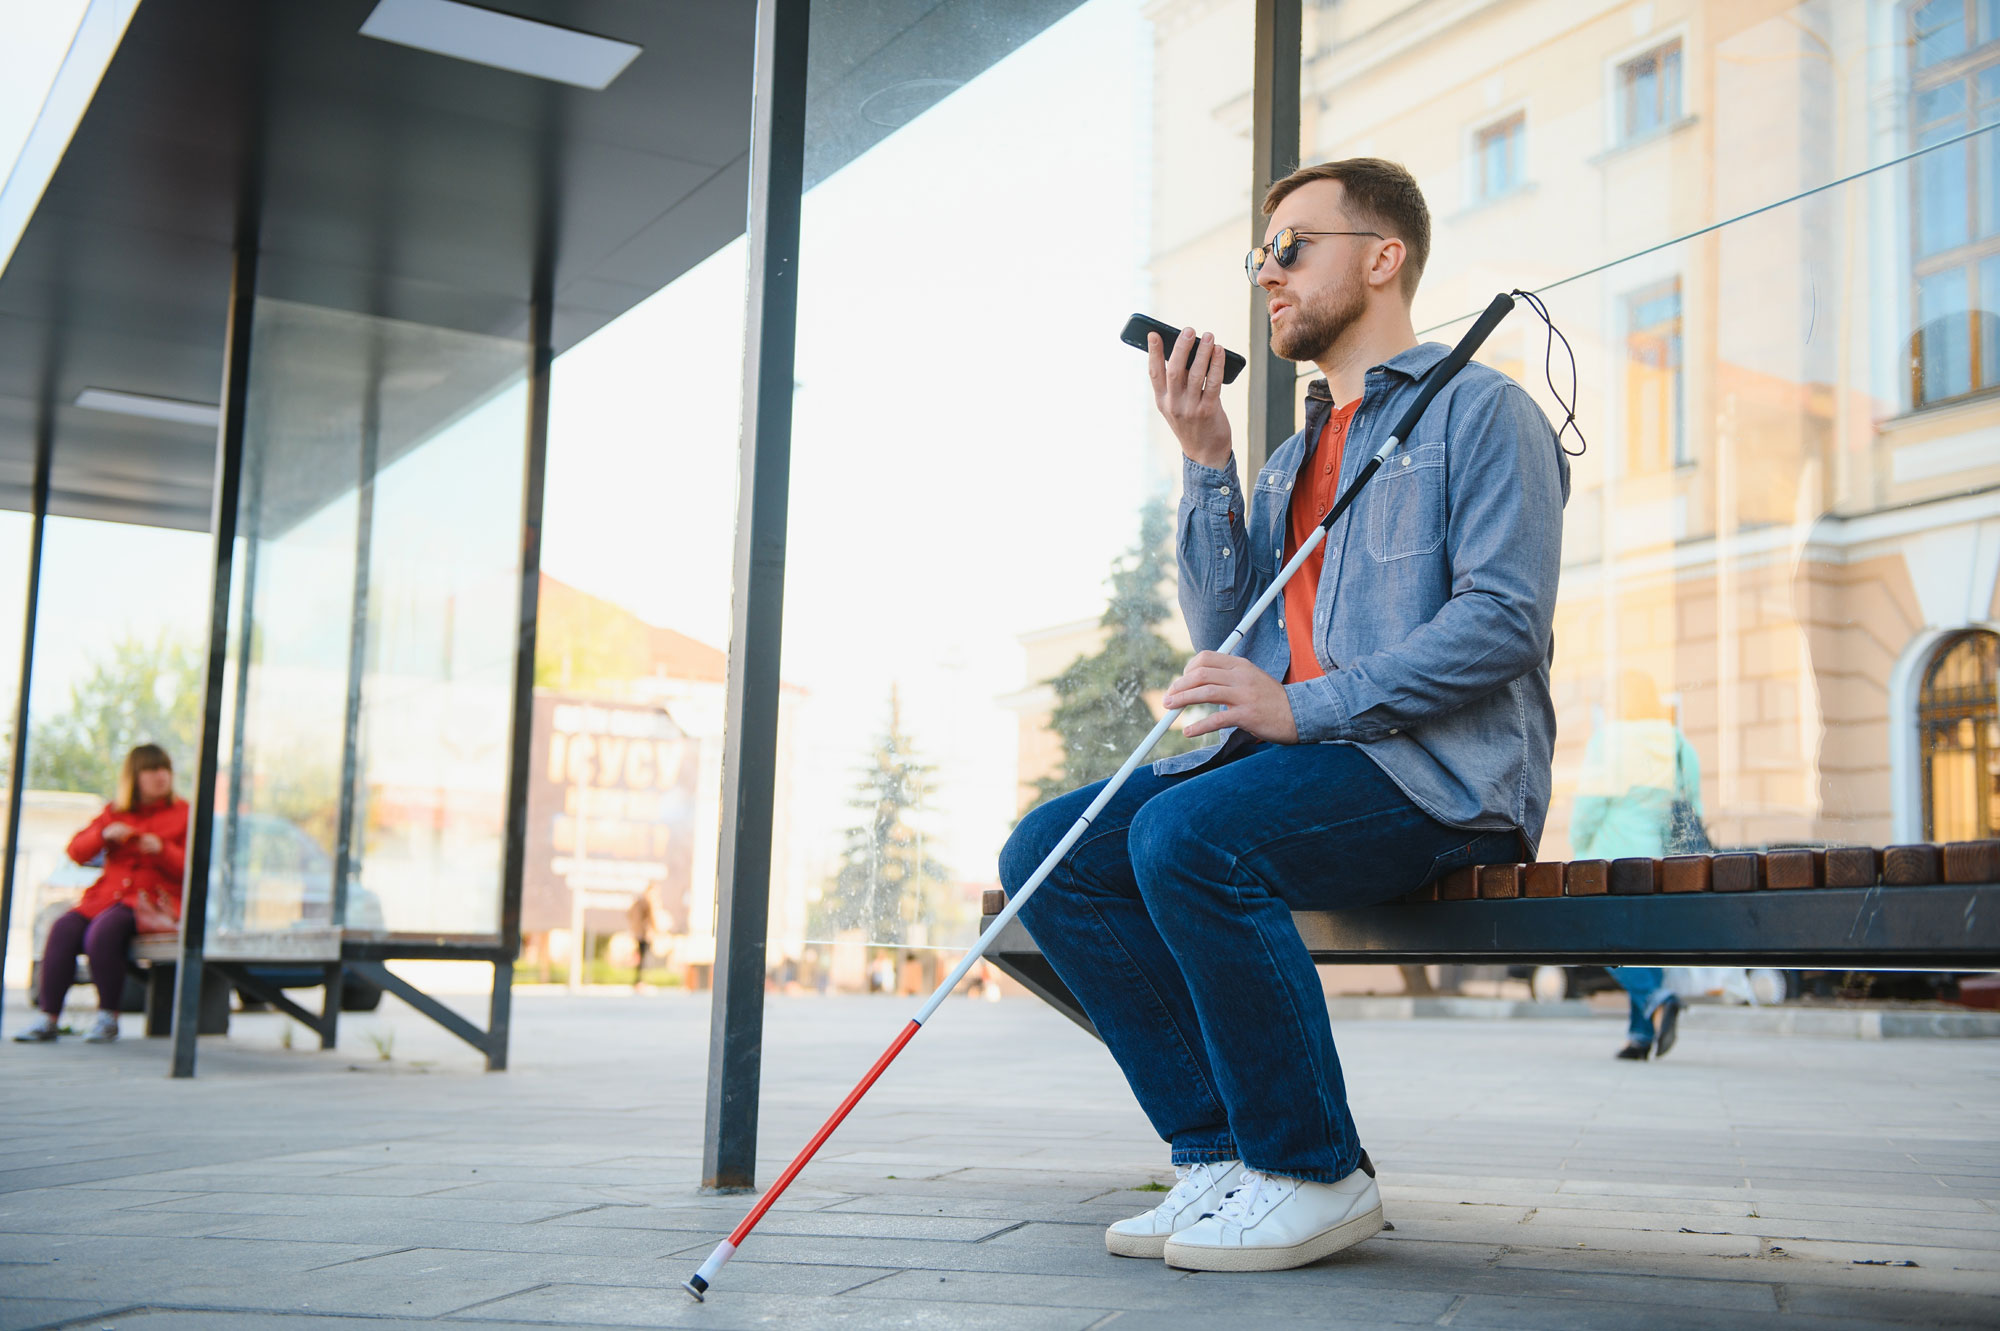 A man sits at a bust stop bench, holding a white cane and using his phone.